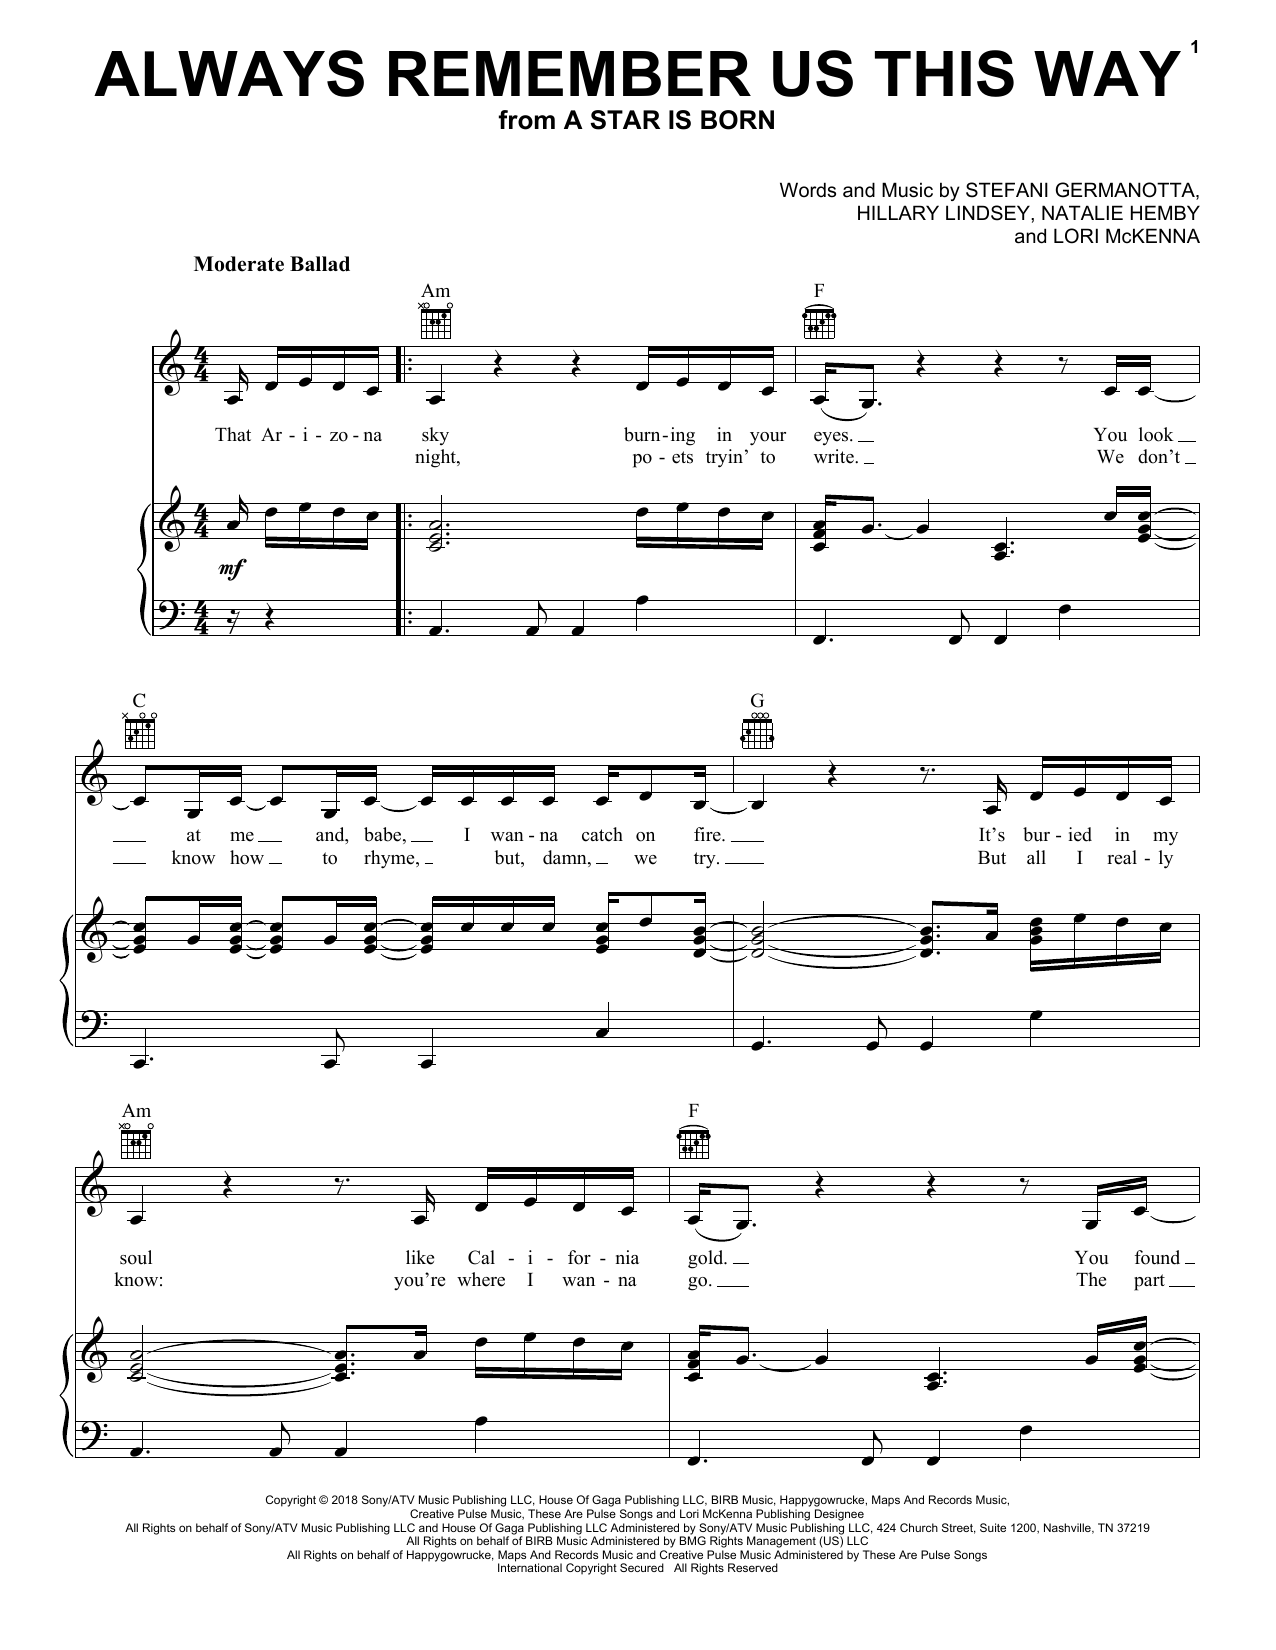 Lady Gaga 'Always Remember Us This Way (from A Star Is Born)' Sheet